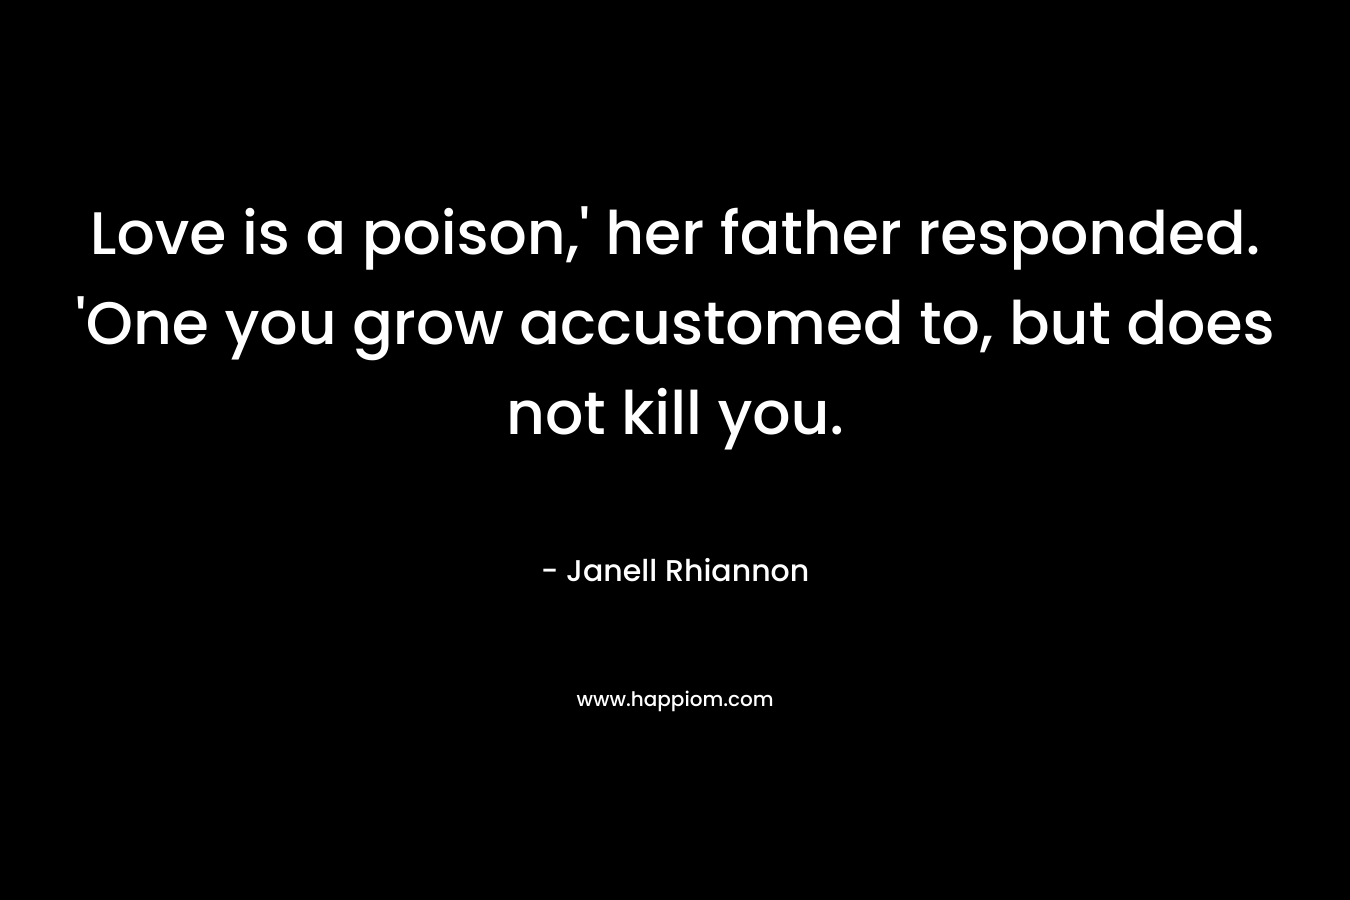 Love is a poison,' her father responded. 'One you grow accustomed to, but does not kill you.